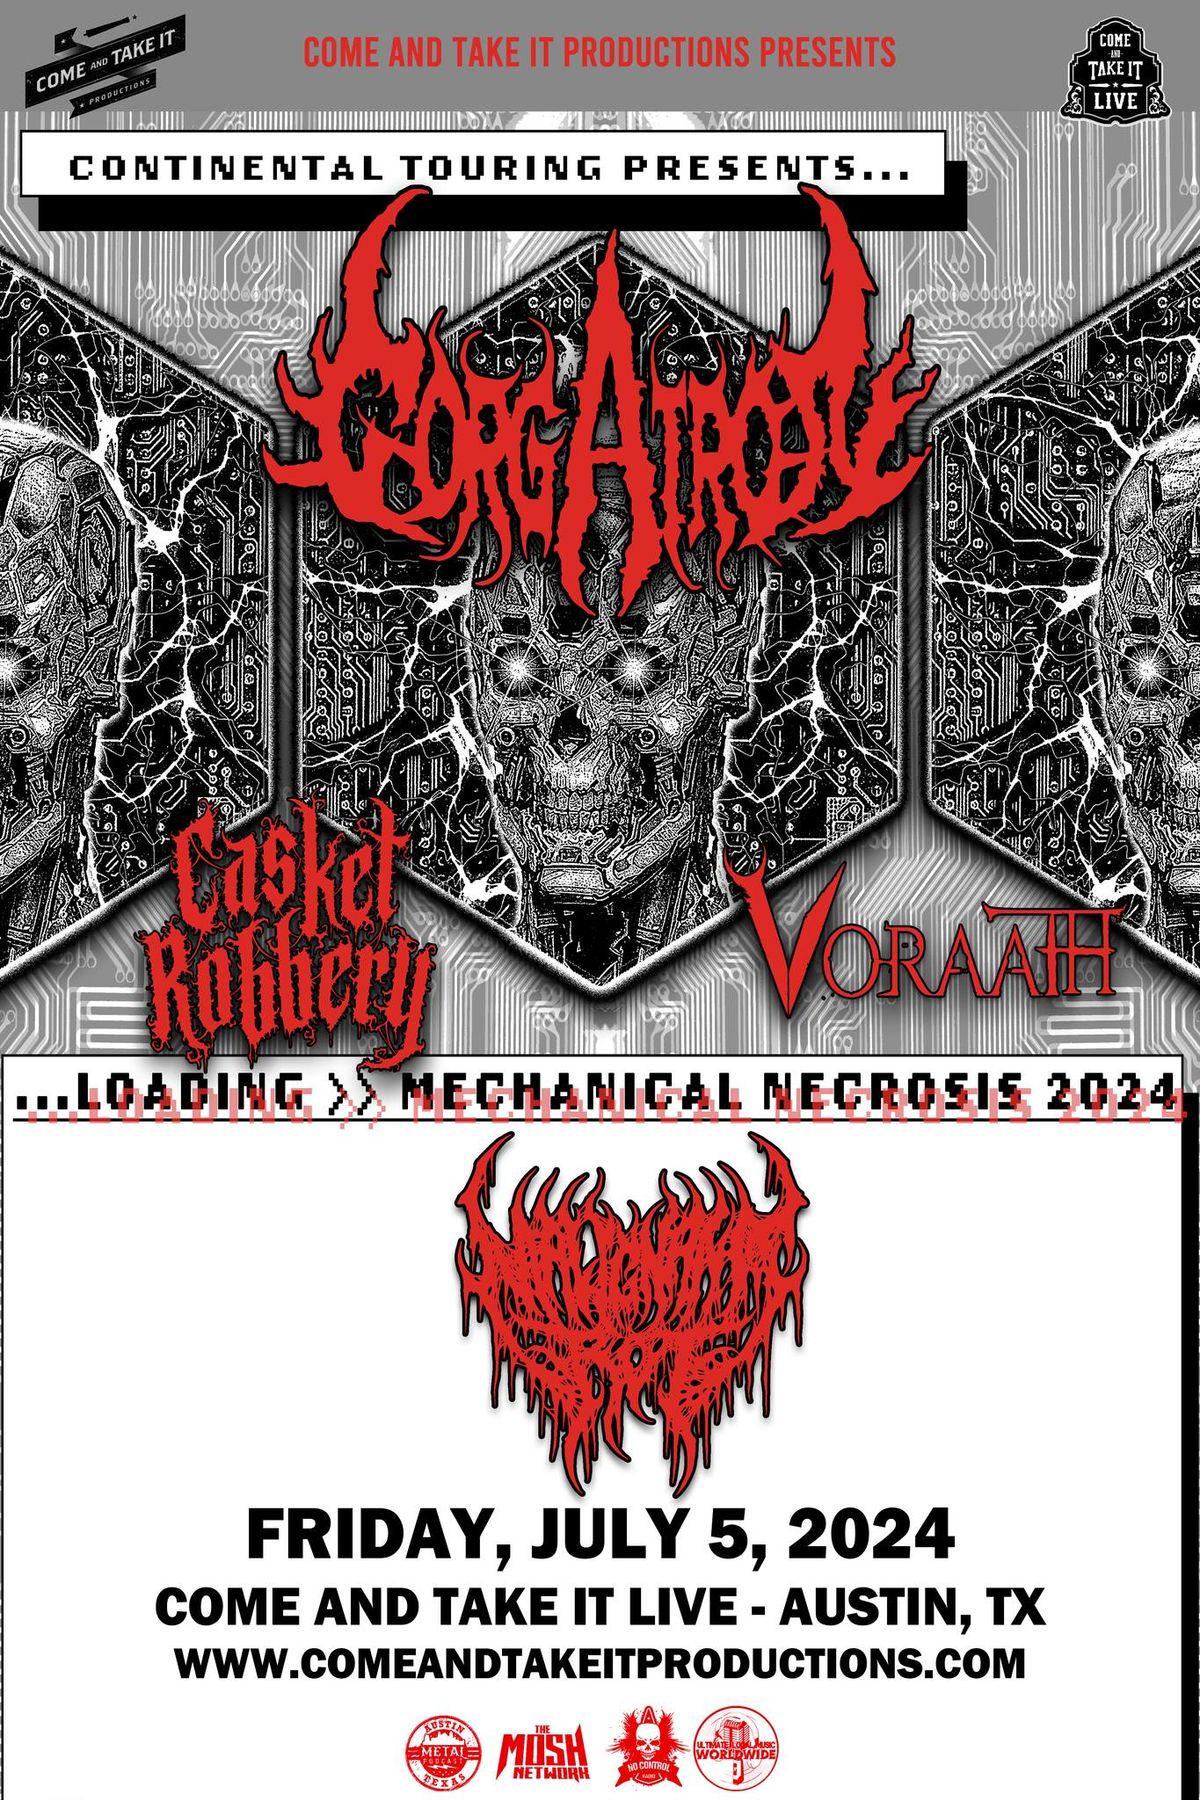 Gorgatron, Casket Robbery, Voraath and Malignant Rot at Come and Take It Live!